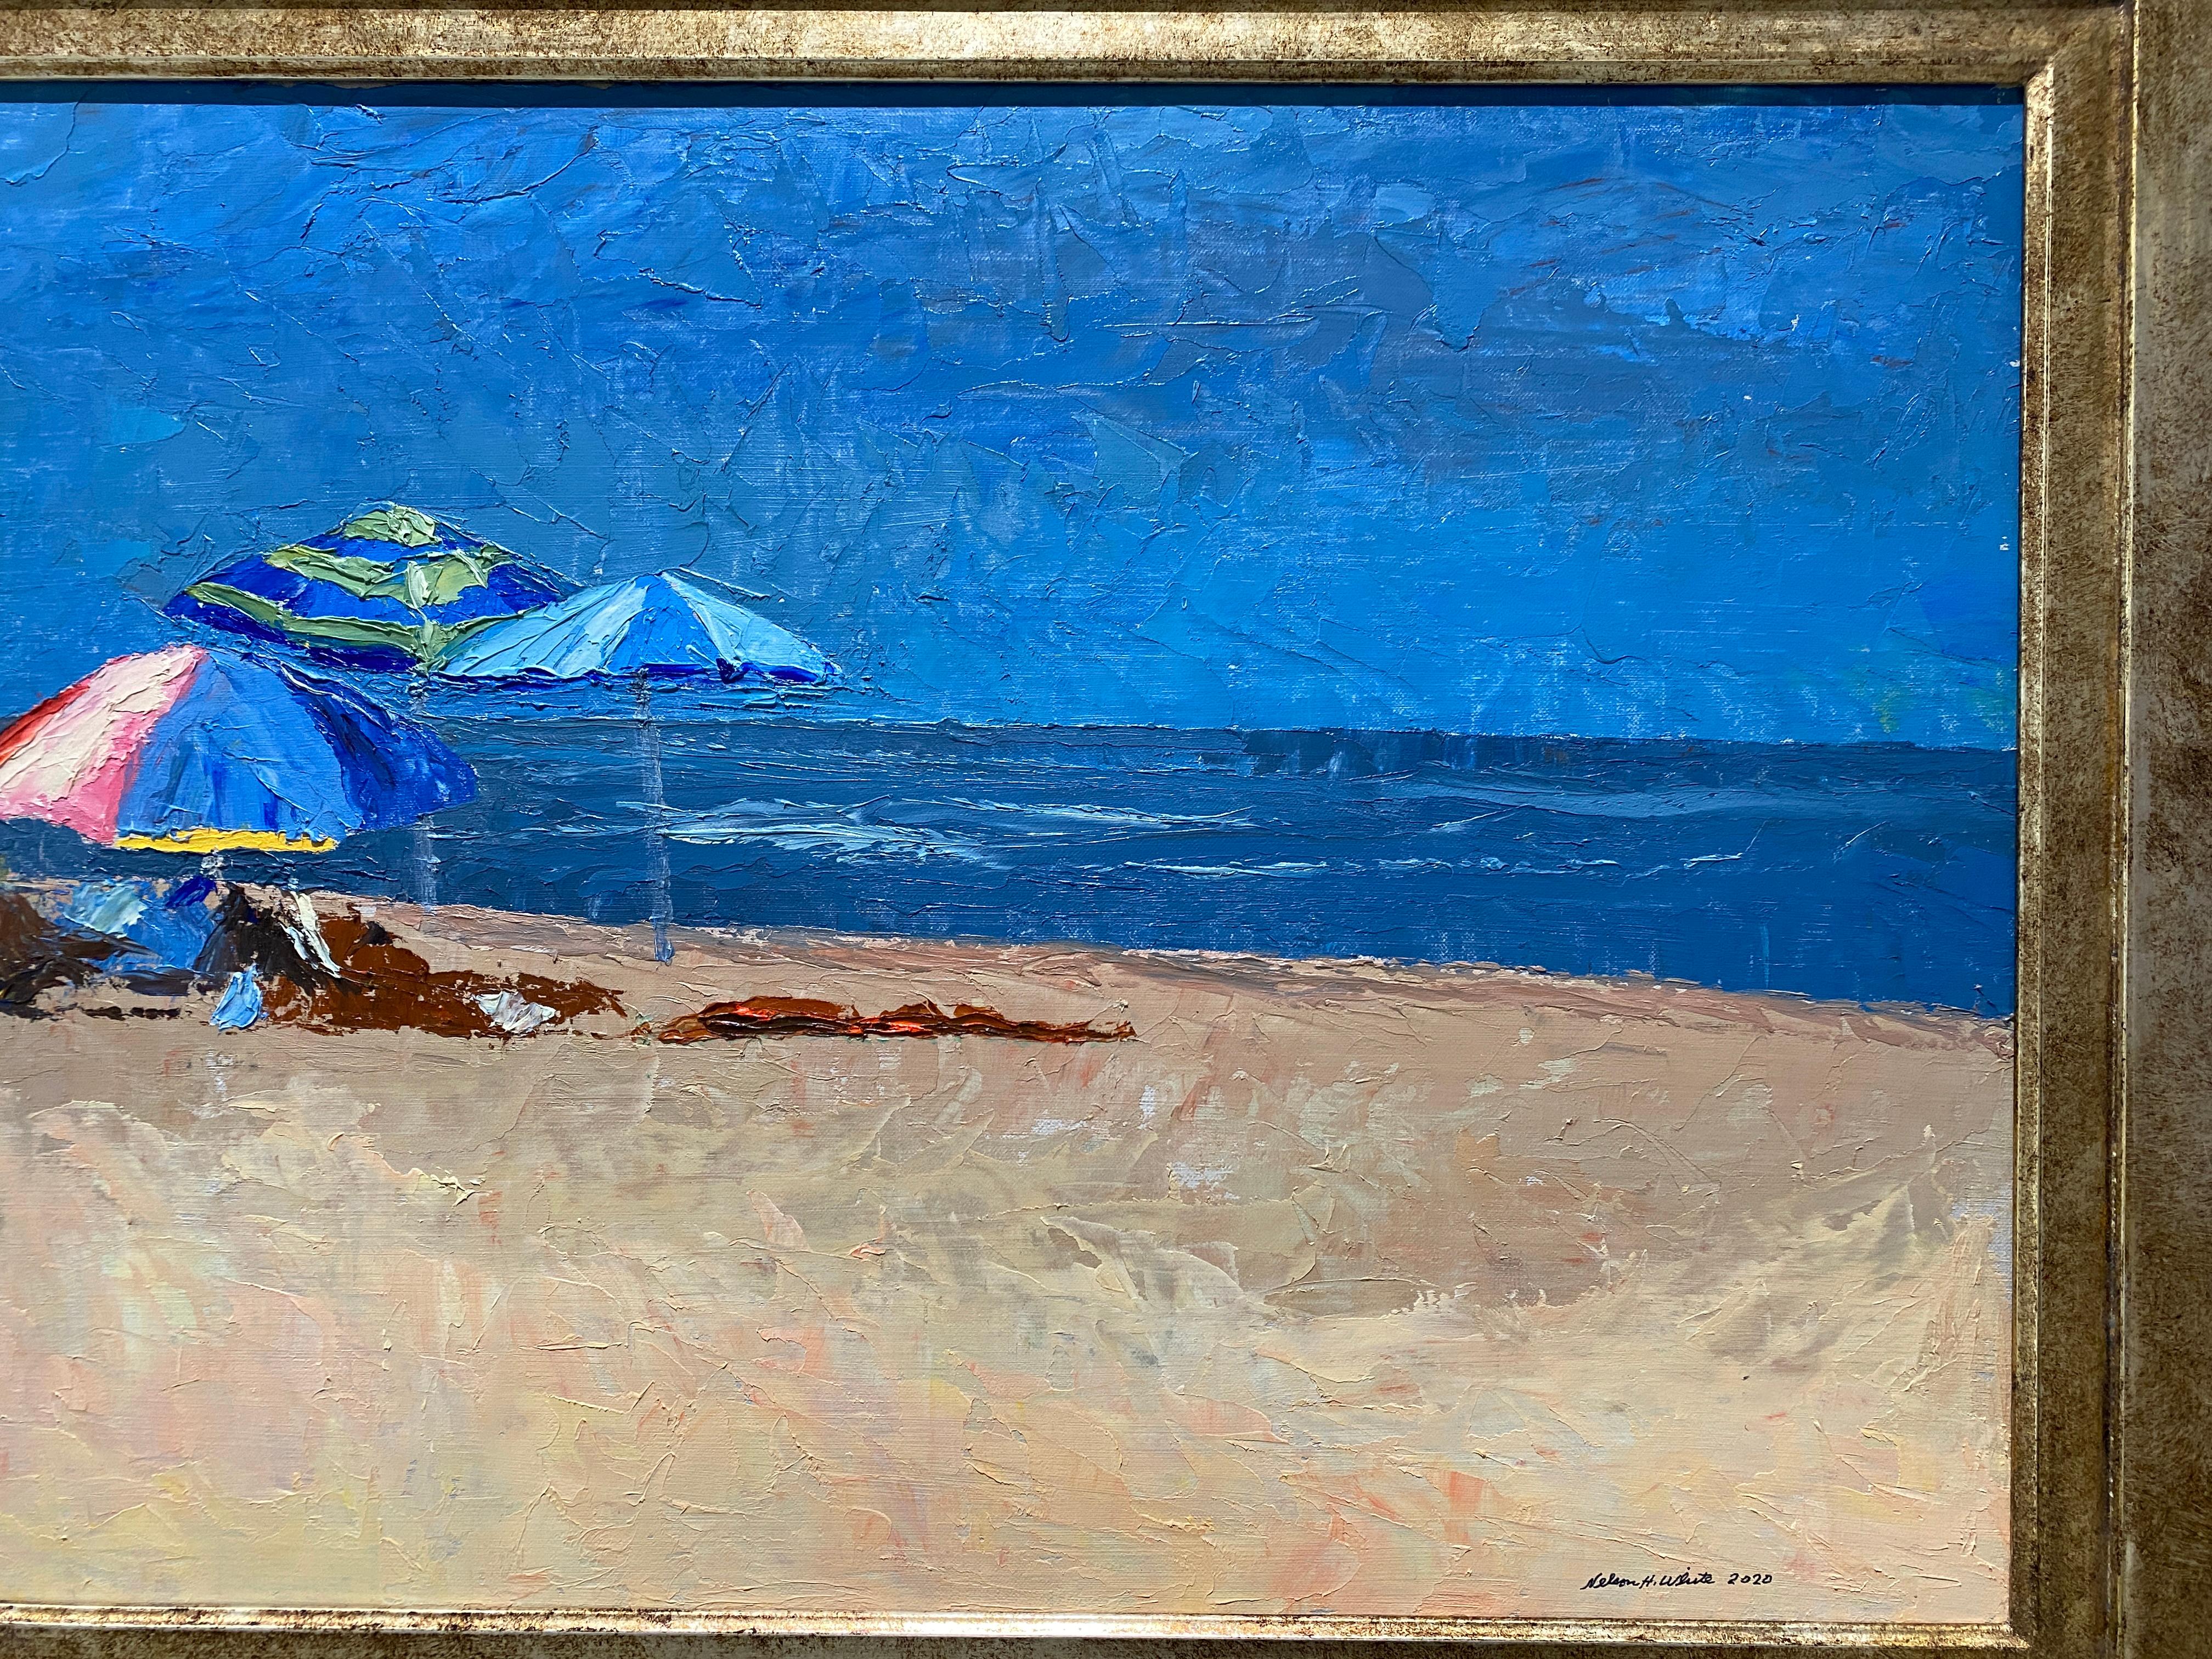 An oil painting of a beach landscape. Painted en plein-air in Southampton, NY at the famous Coopers Beach. Three umbrellas are posted in the sand, creating shade for abstract figures, barely decipherable in brown pigments. Painted thickly with oil